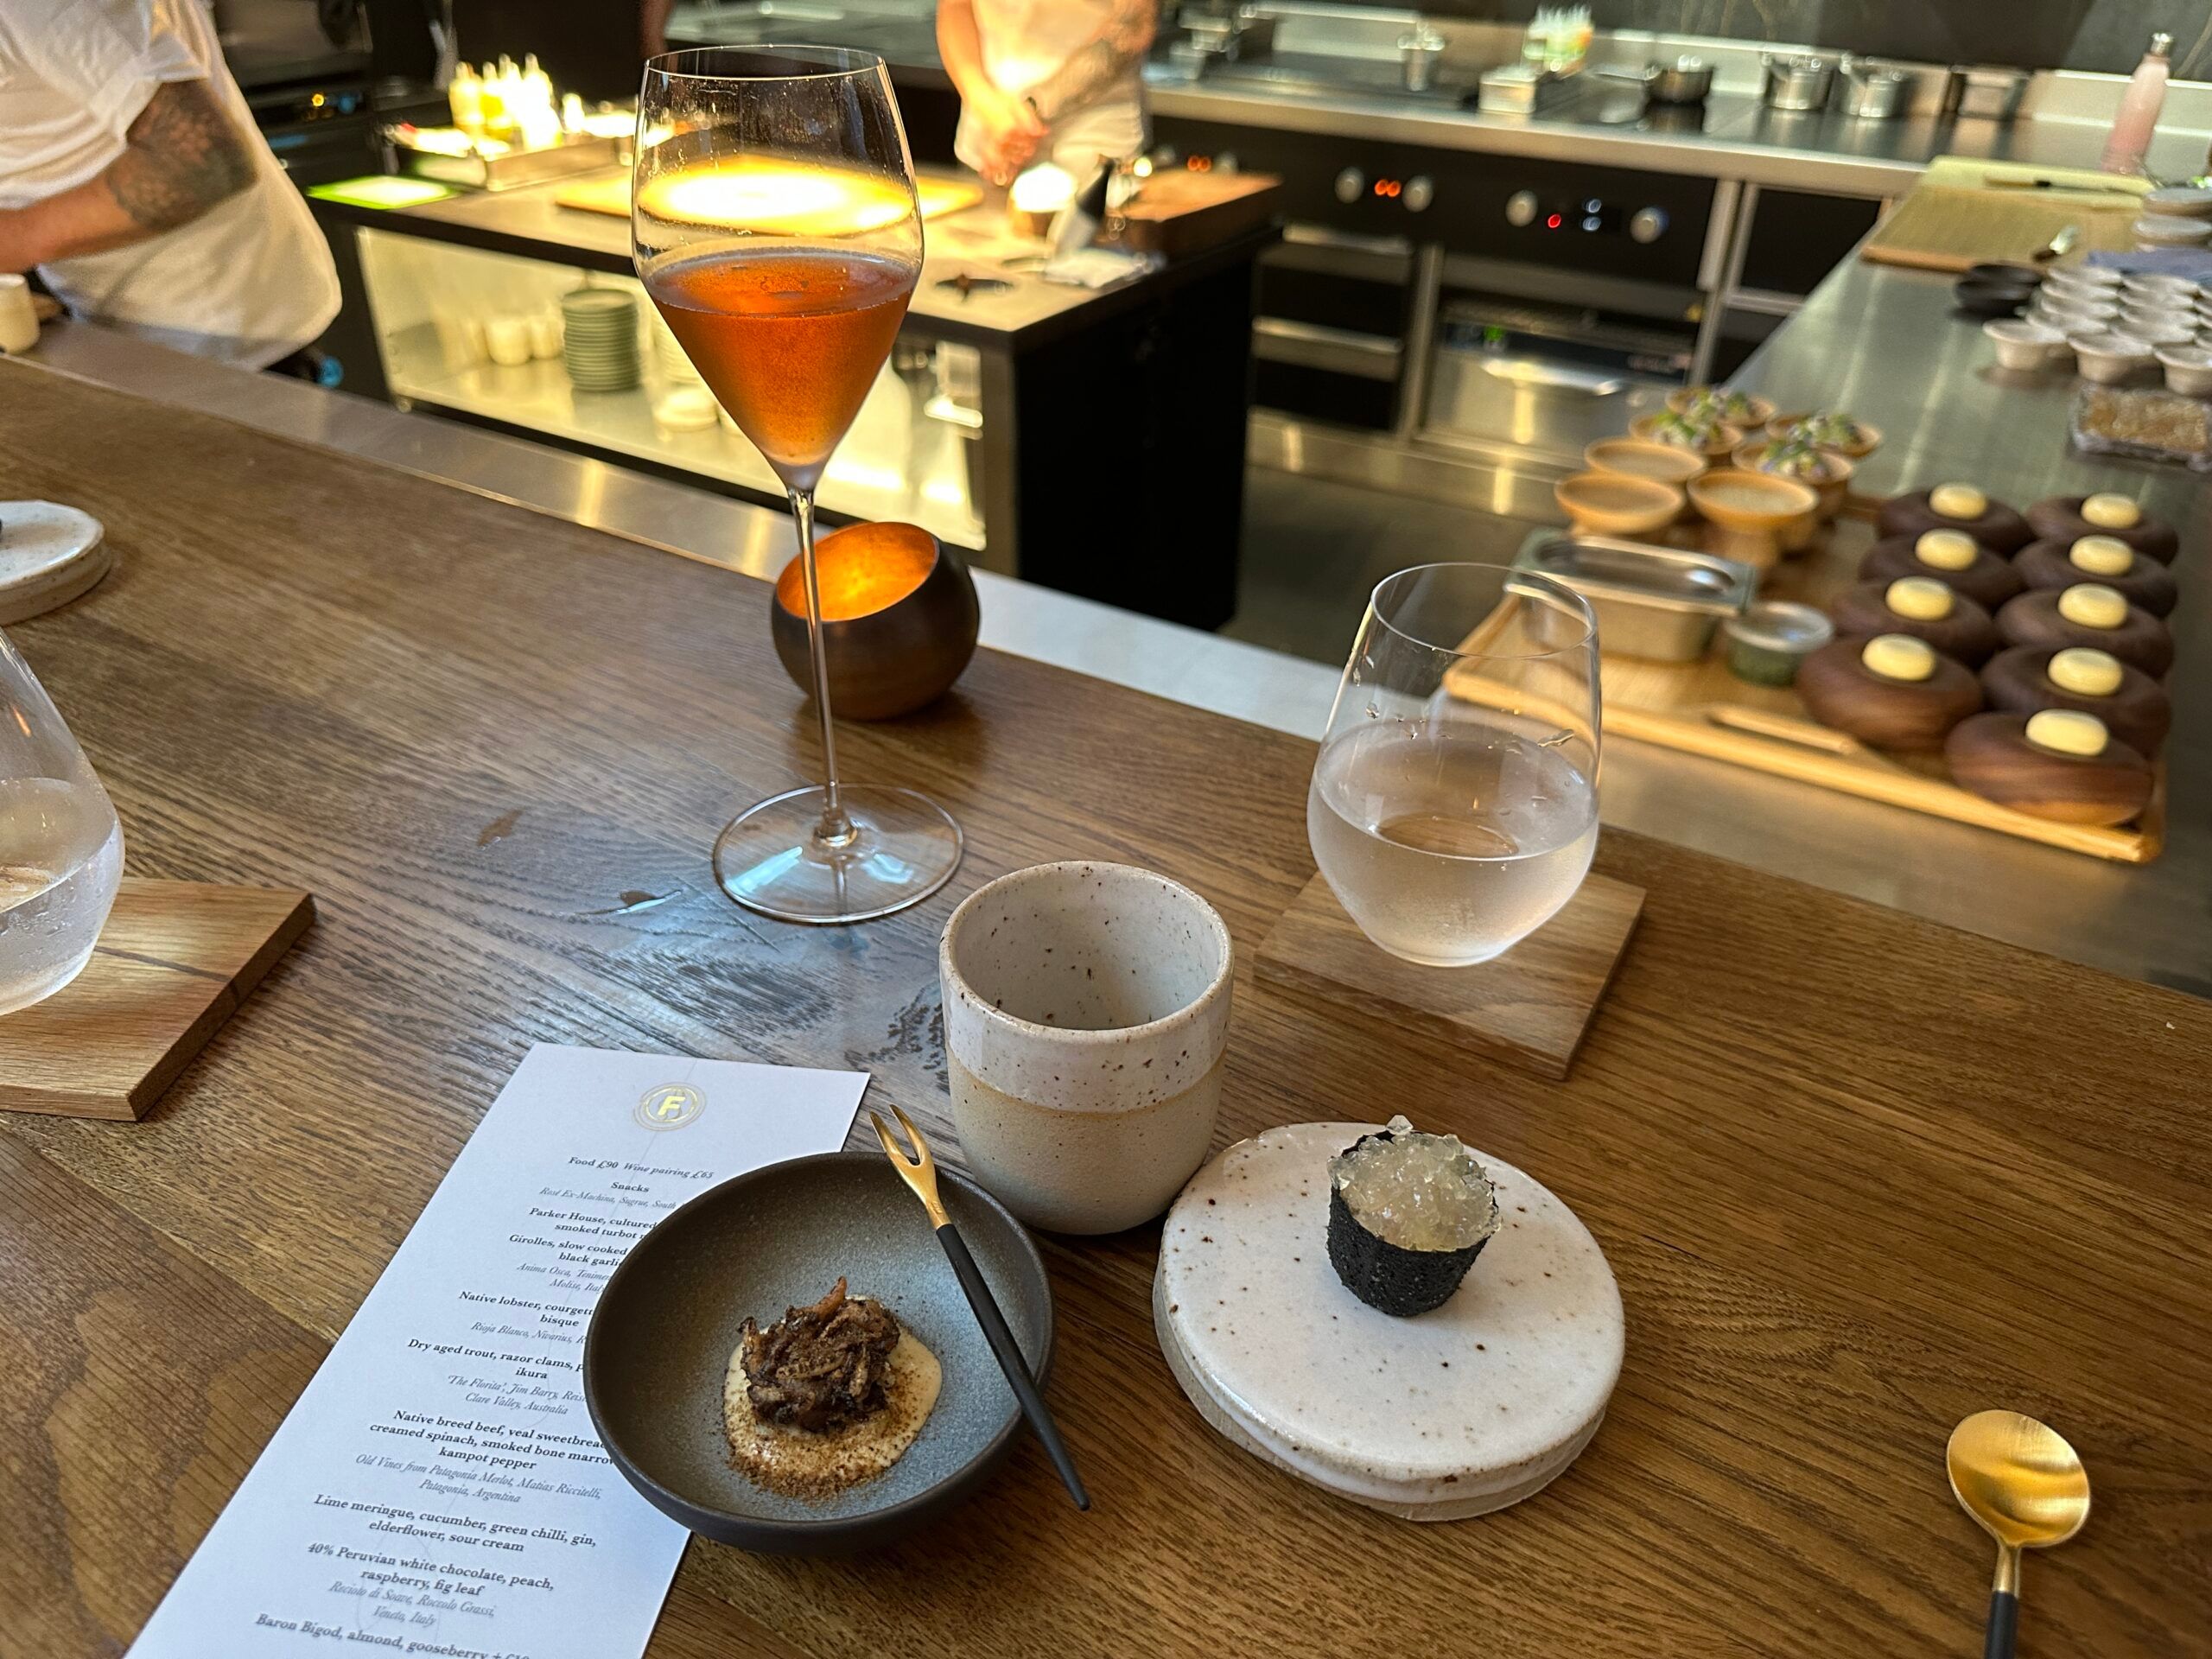 Chef Dave Mothersill's restaurant serves snacks with wine at the open kitchen.